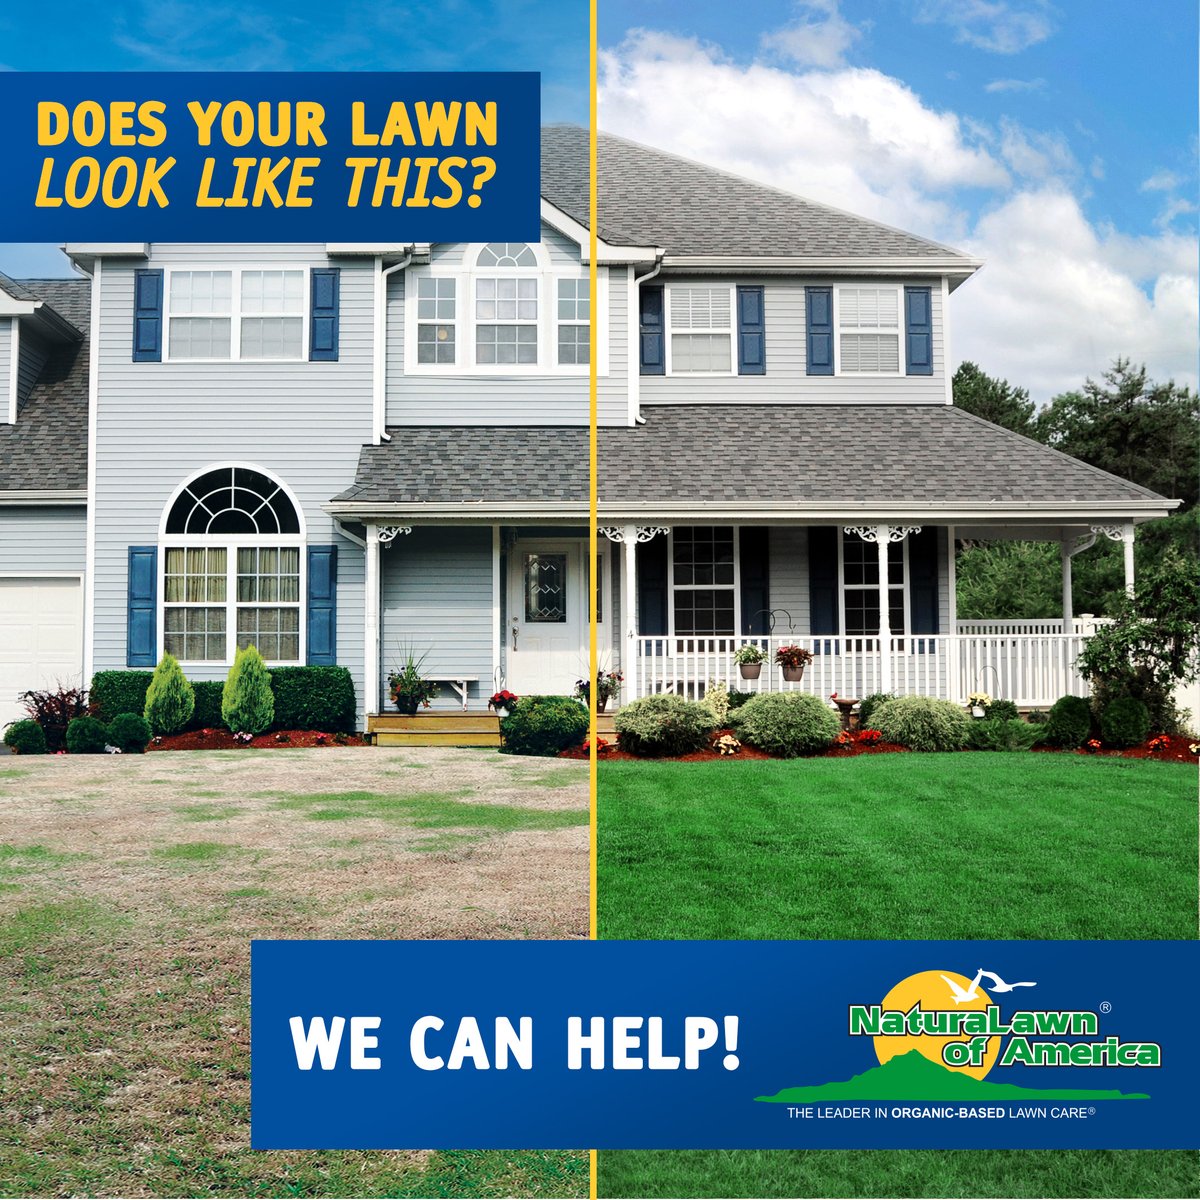 Our environmentally friendly approach to organic-based lawn care has been growing green lawns quickly, more naturally, and with fewer weeds since 1987. ow.ly/rjct50Rsoi8 or call 800-989-5444 #NaturaLawn #NLA #IndustryLeader #LawnCare #EnvironmentallyFriendly #PetFriendly